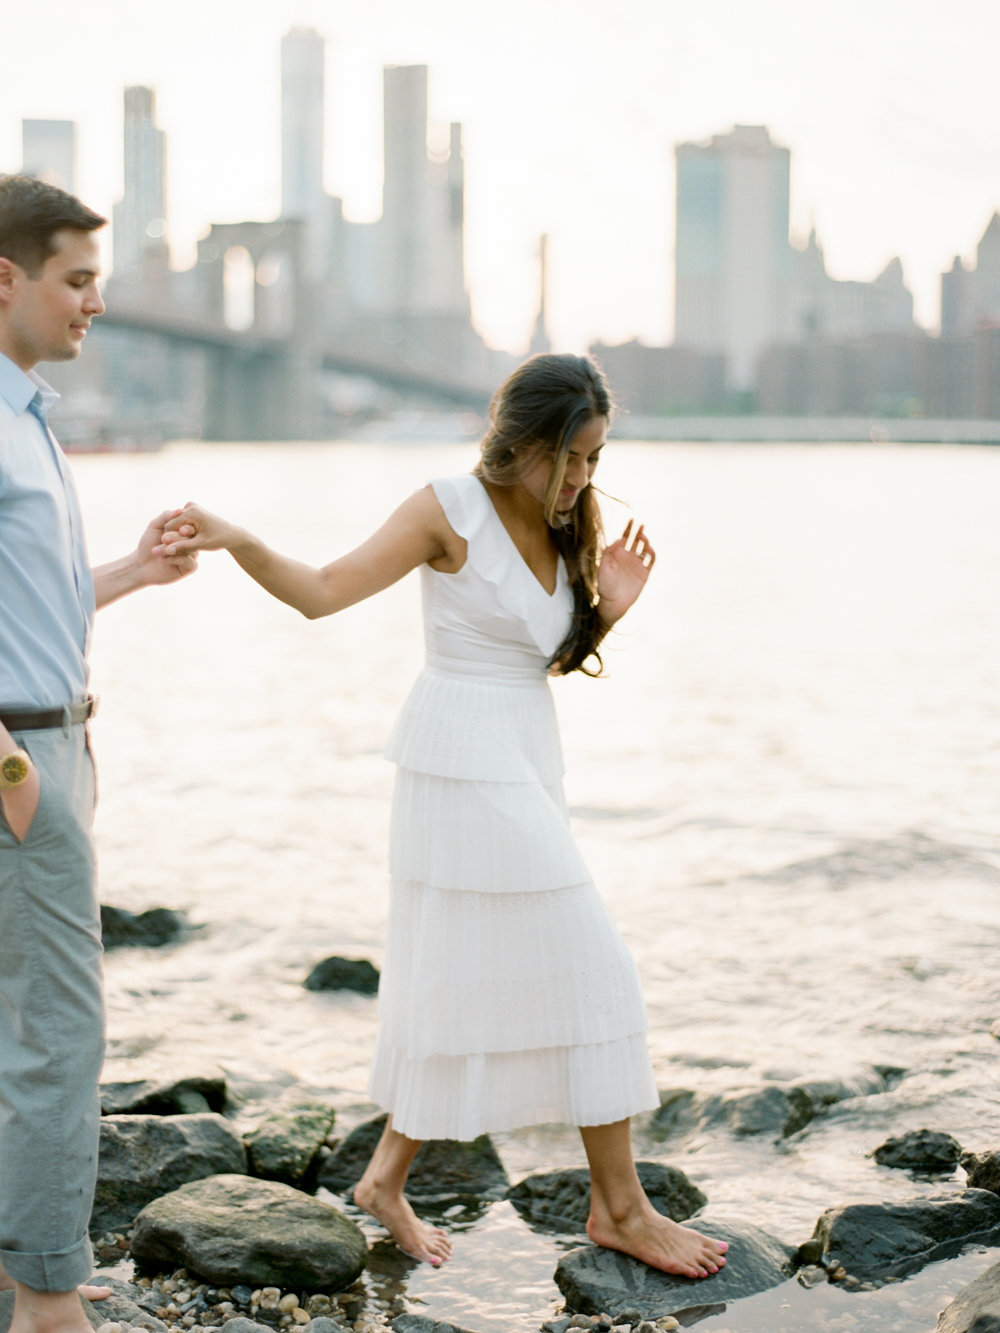 mary-dougherty-engagement-dumbo-photography-nyc-brooklyn05